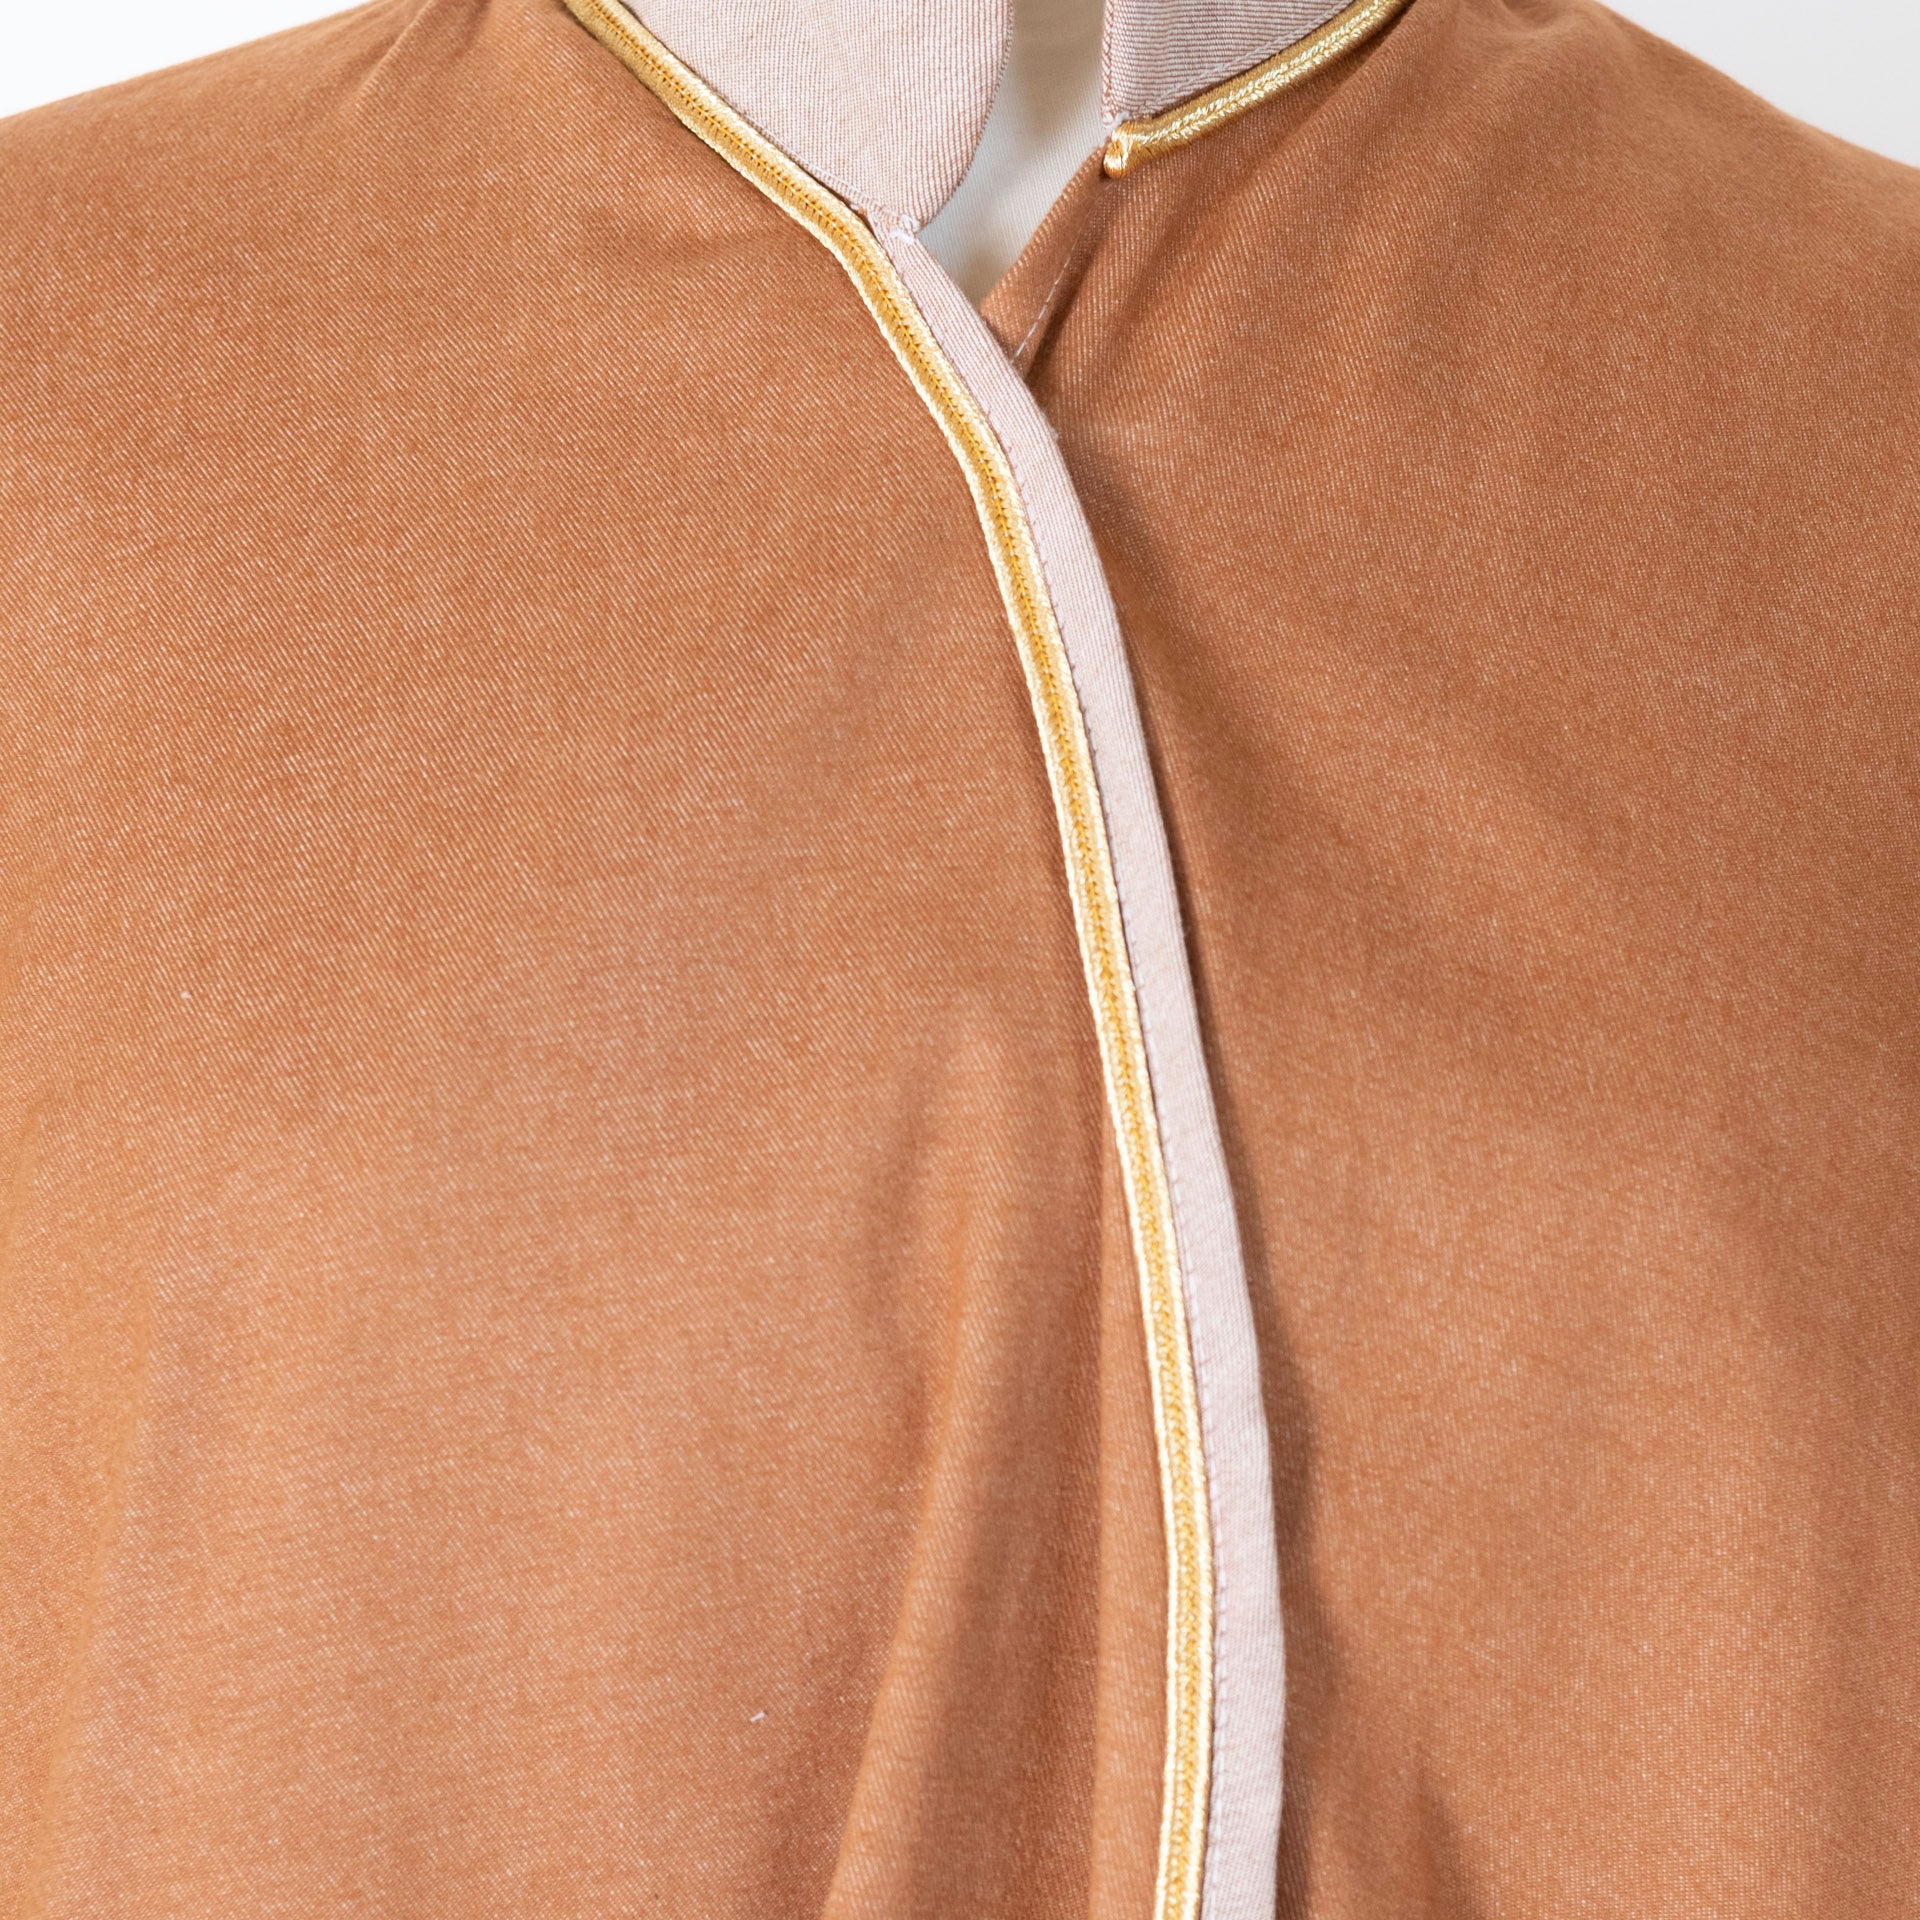 Brown Jeans Abaya With Beige Collar From Mshbak